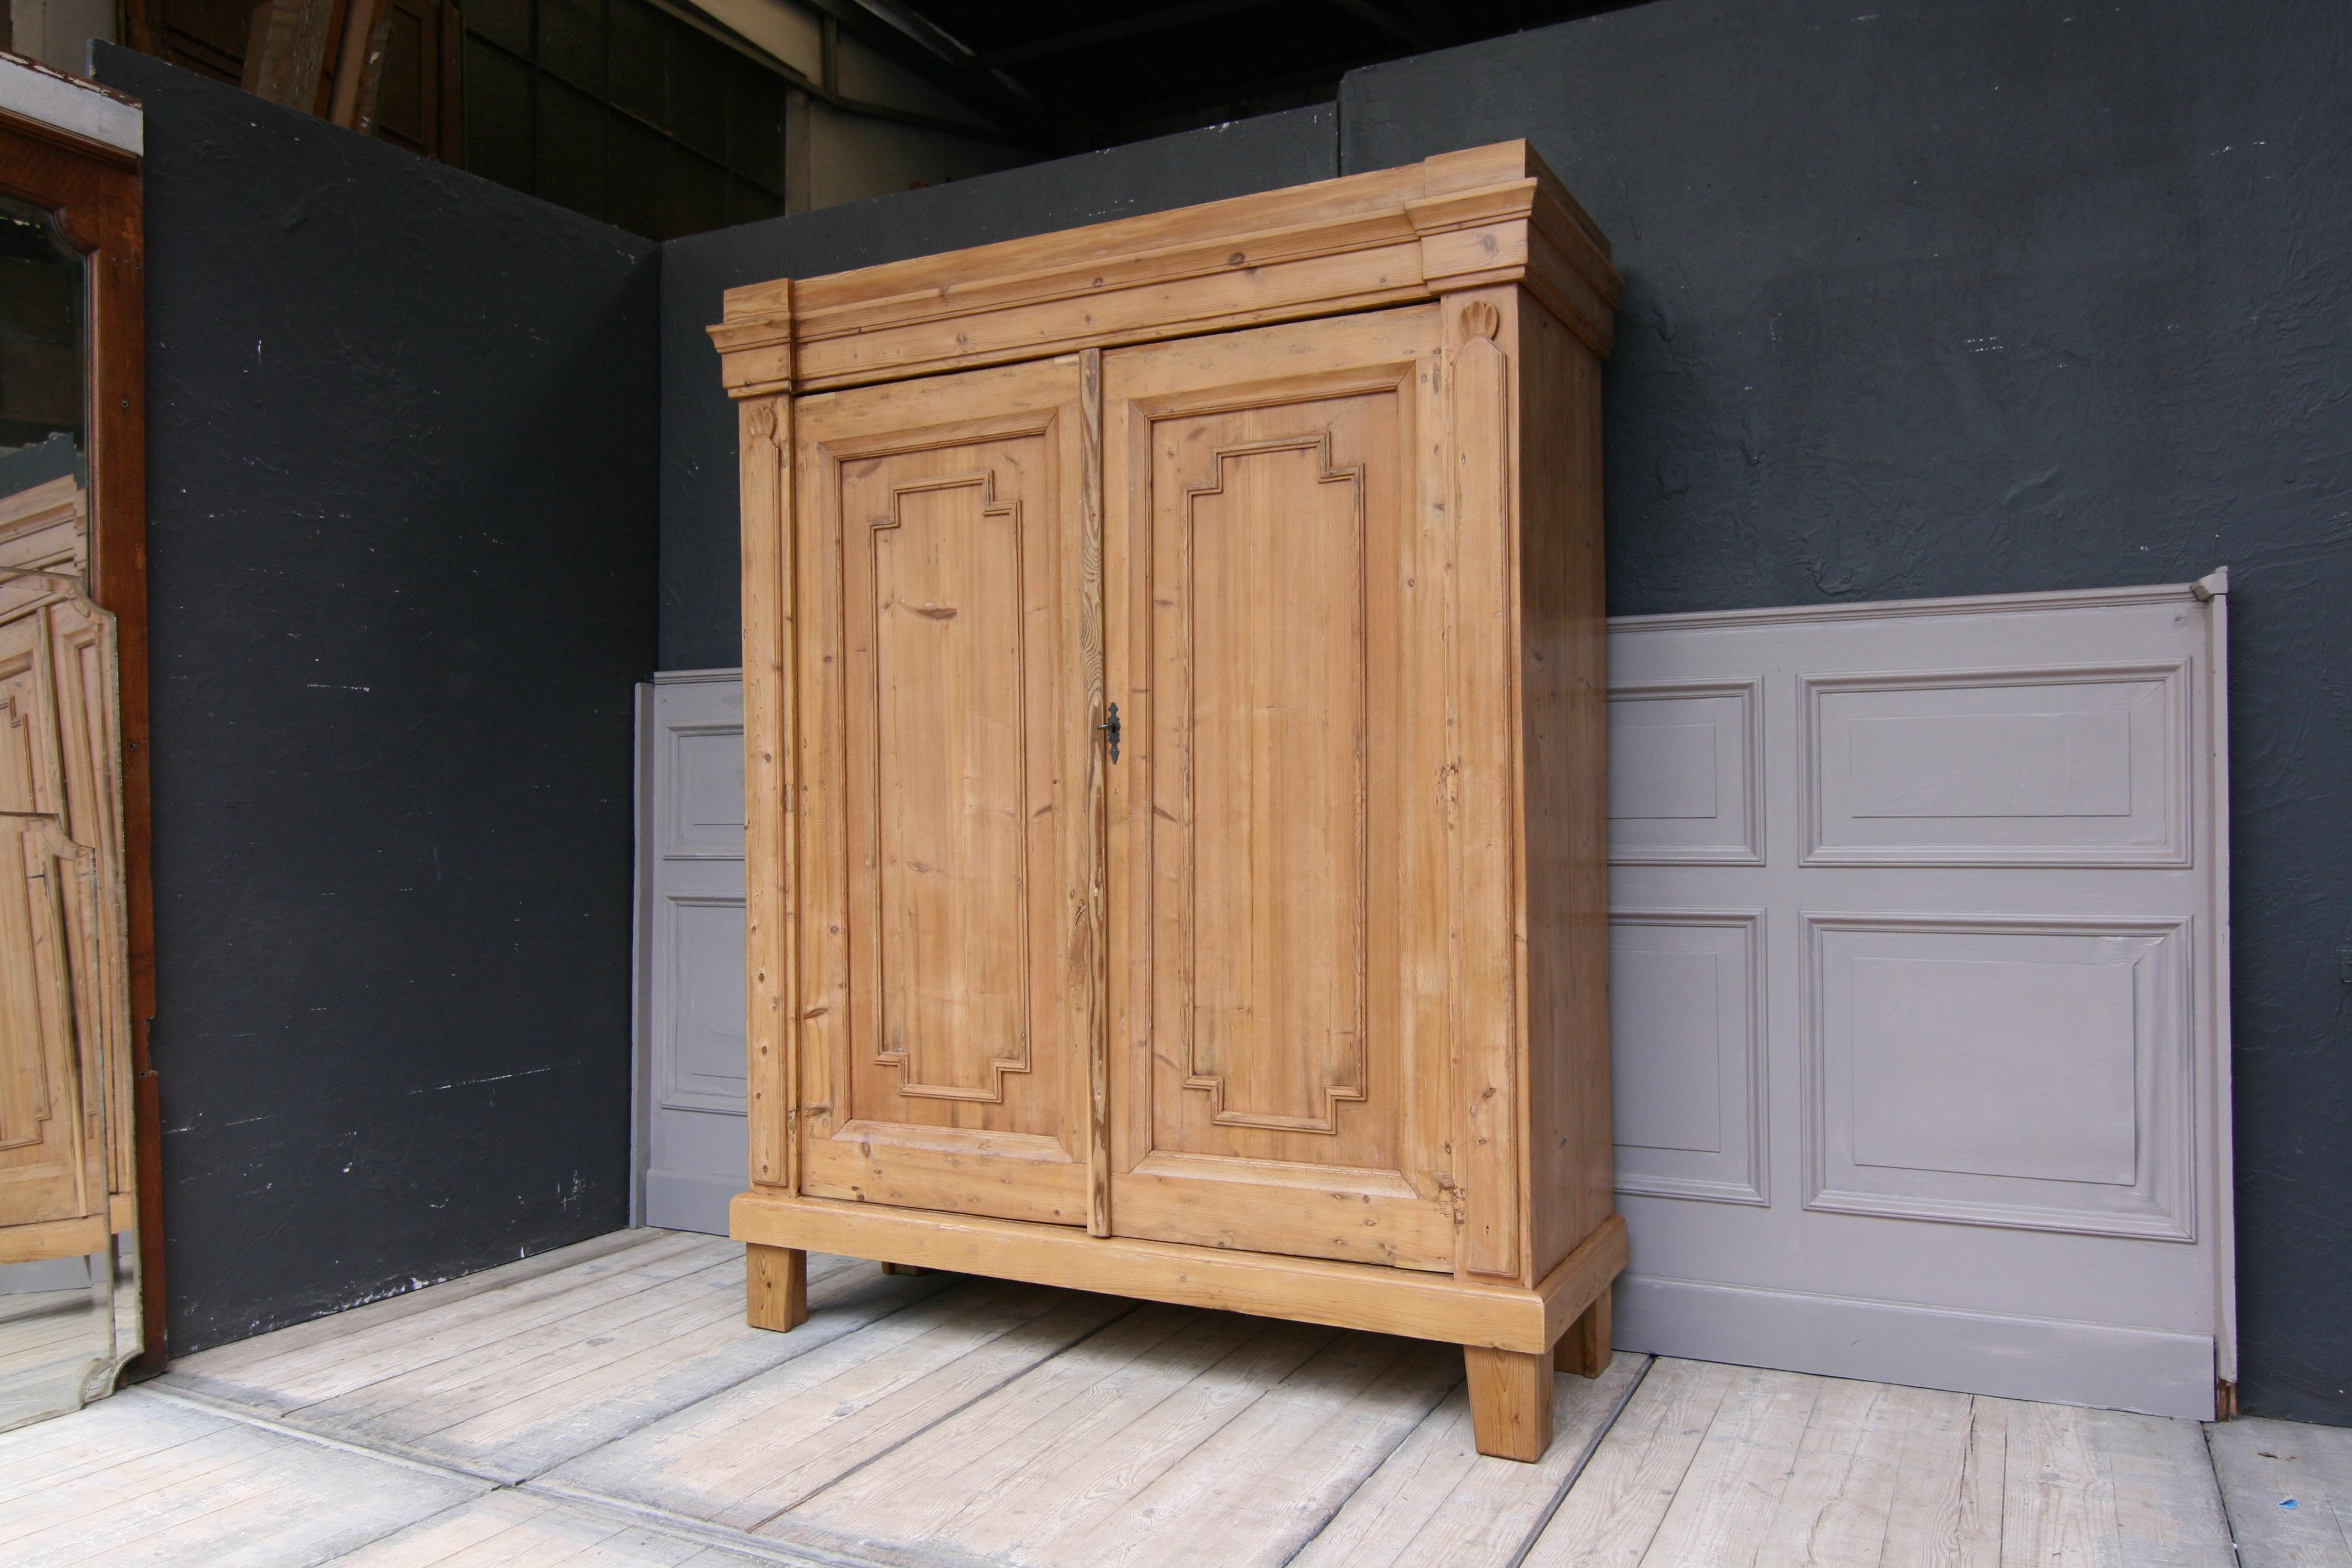 Rustic Early 19th Century German Provincial Cabinet made of Pine